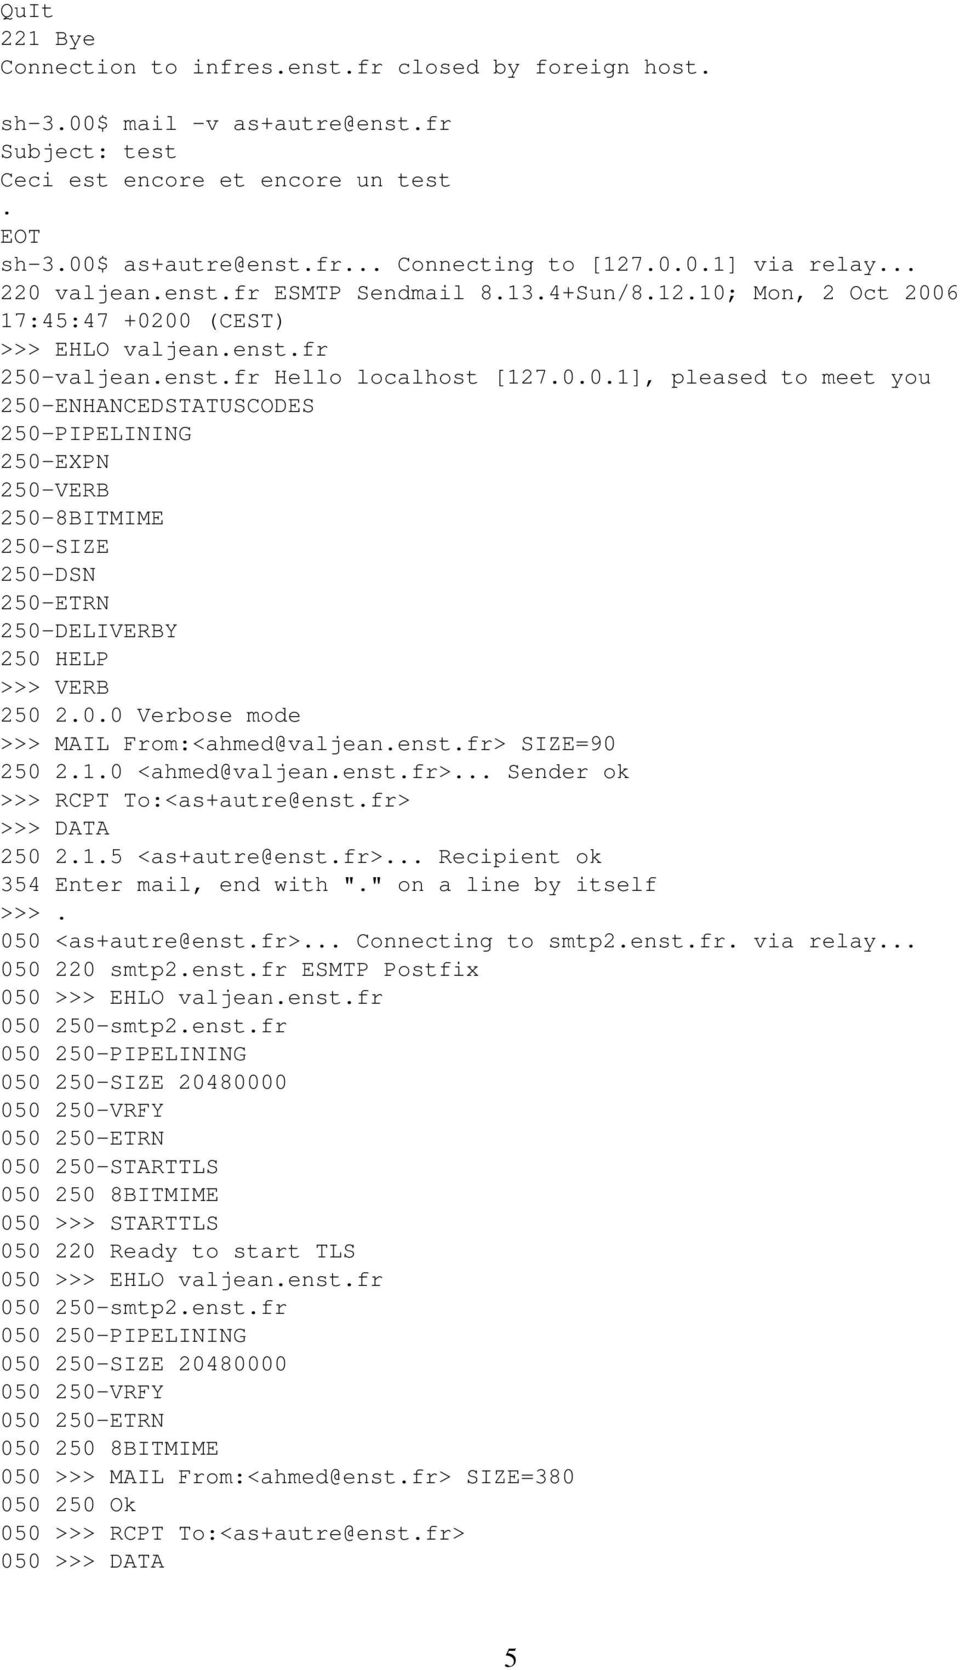 0.0 Verbose mode >>> MAIL From:<ahmed@valjean.enst.fr> SIZE=90 250 2.1.0 <ahmed@valjean.enst.fr>... Sender ok >>> RCPT To:<as+autre@enst.fr> >>> DATA 250 2.1.5 <as+autre@enst.fr>... Recipient ok 354 Enter mail, end with ".